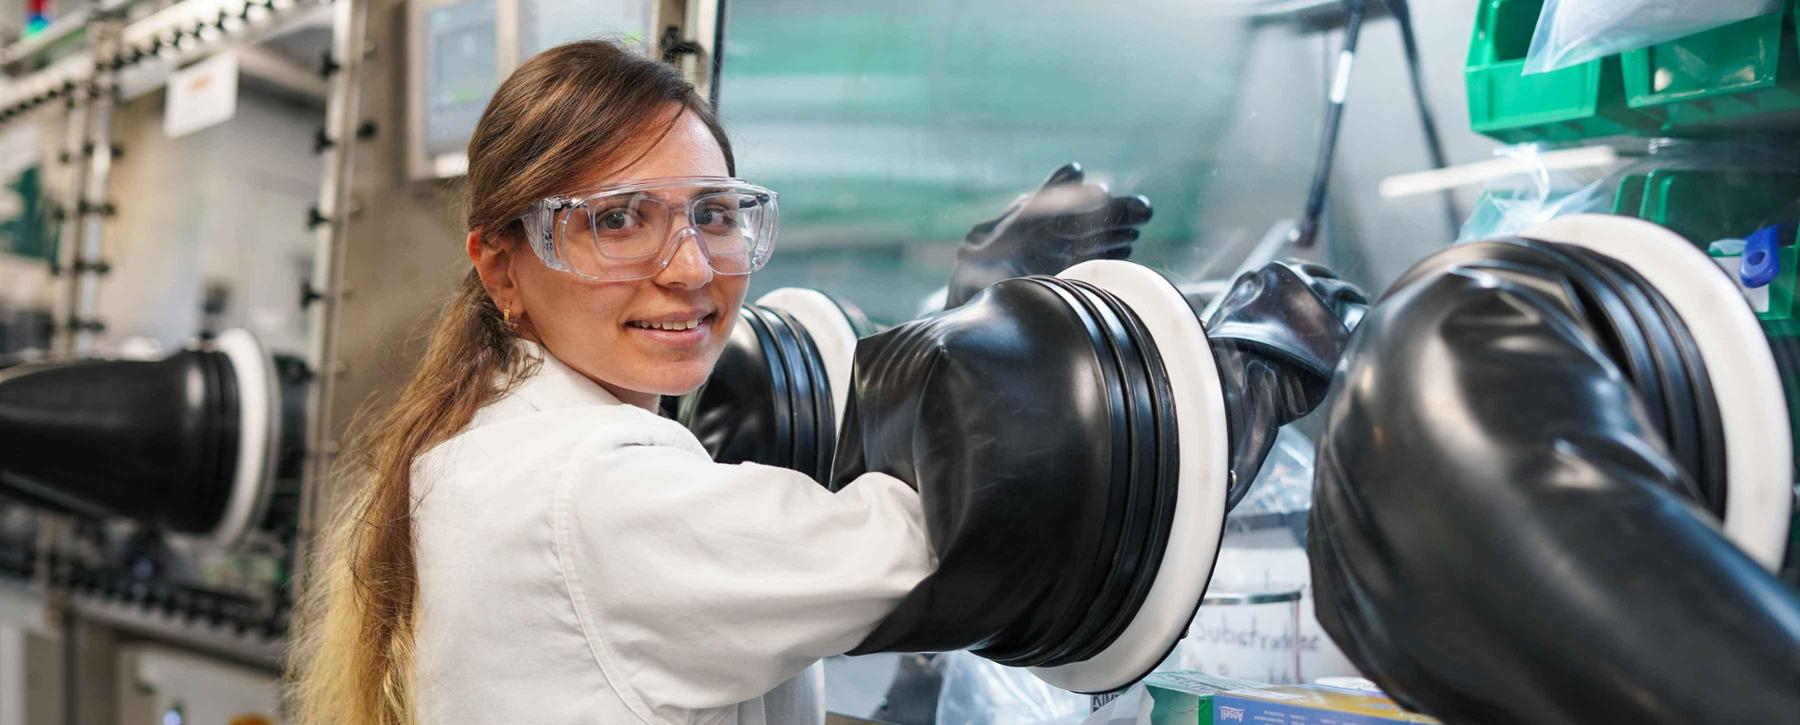 A female student wearing safety glasses and a lab coat smiles at the camera. She is in a lab and her hands are in a chamber in front of her.